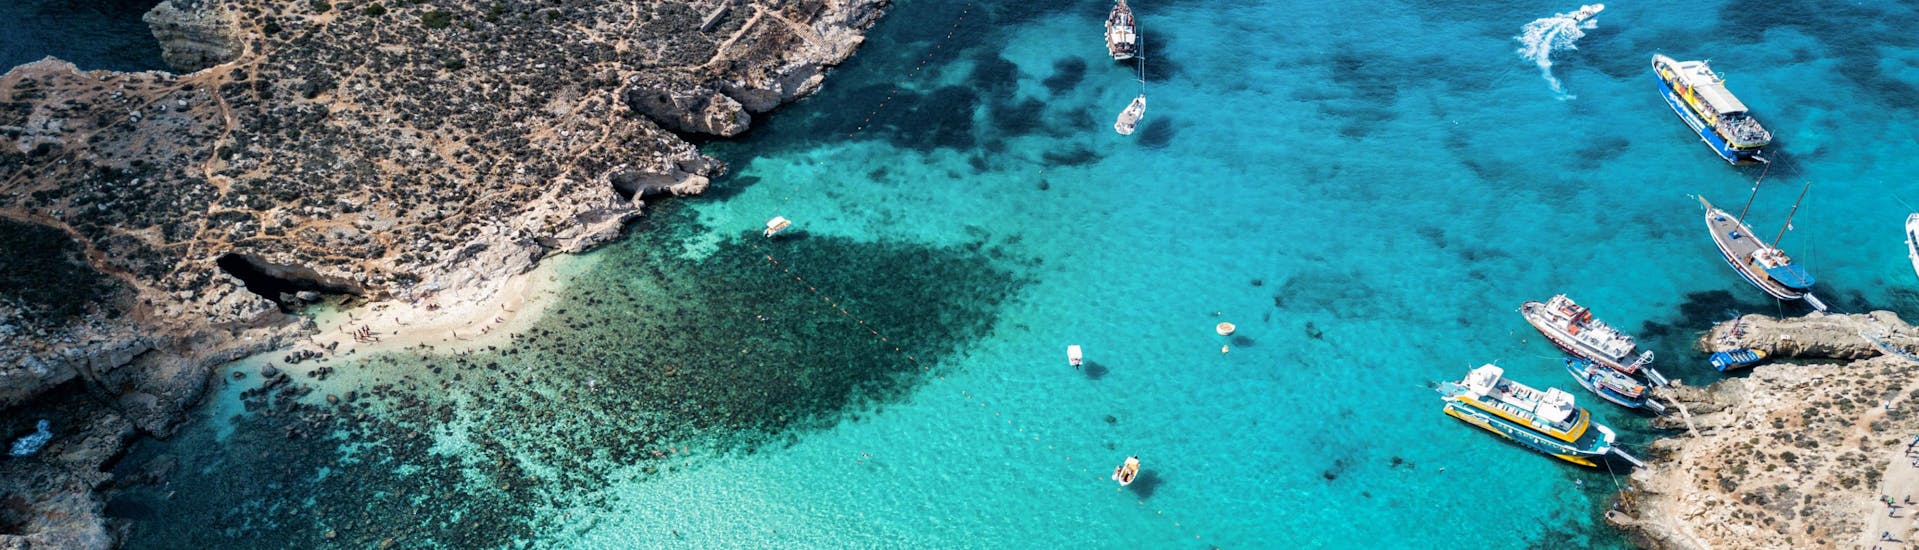 Top view of boats gathering in the Blue Lagoon, Malta,  a popular destination for boat tours.